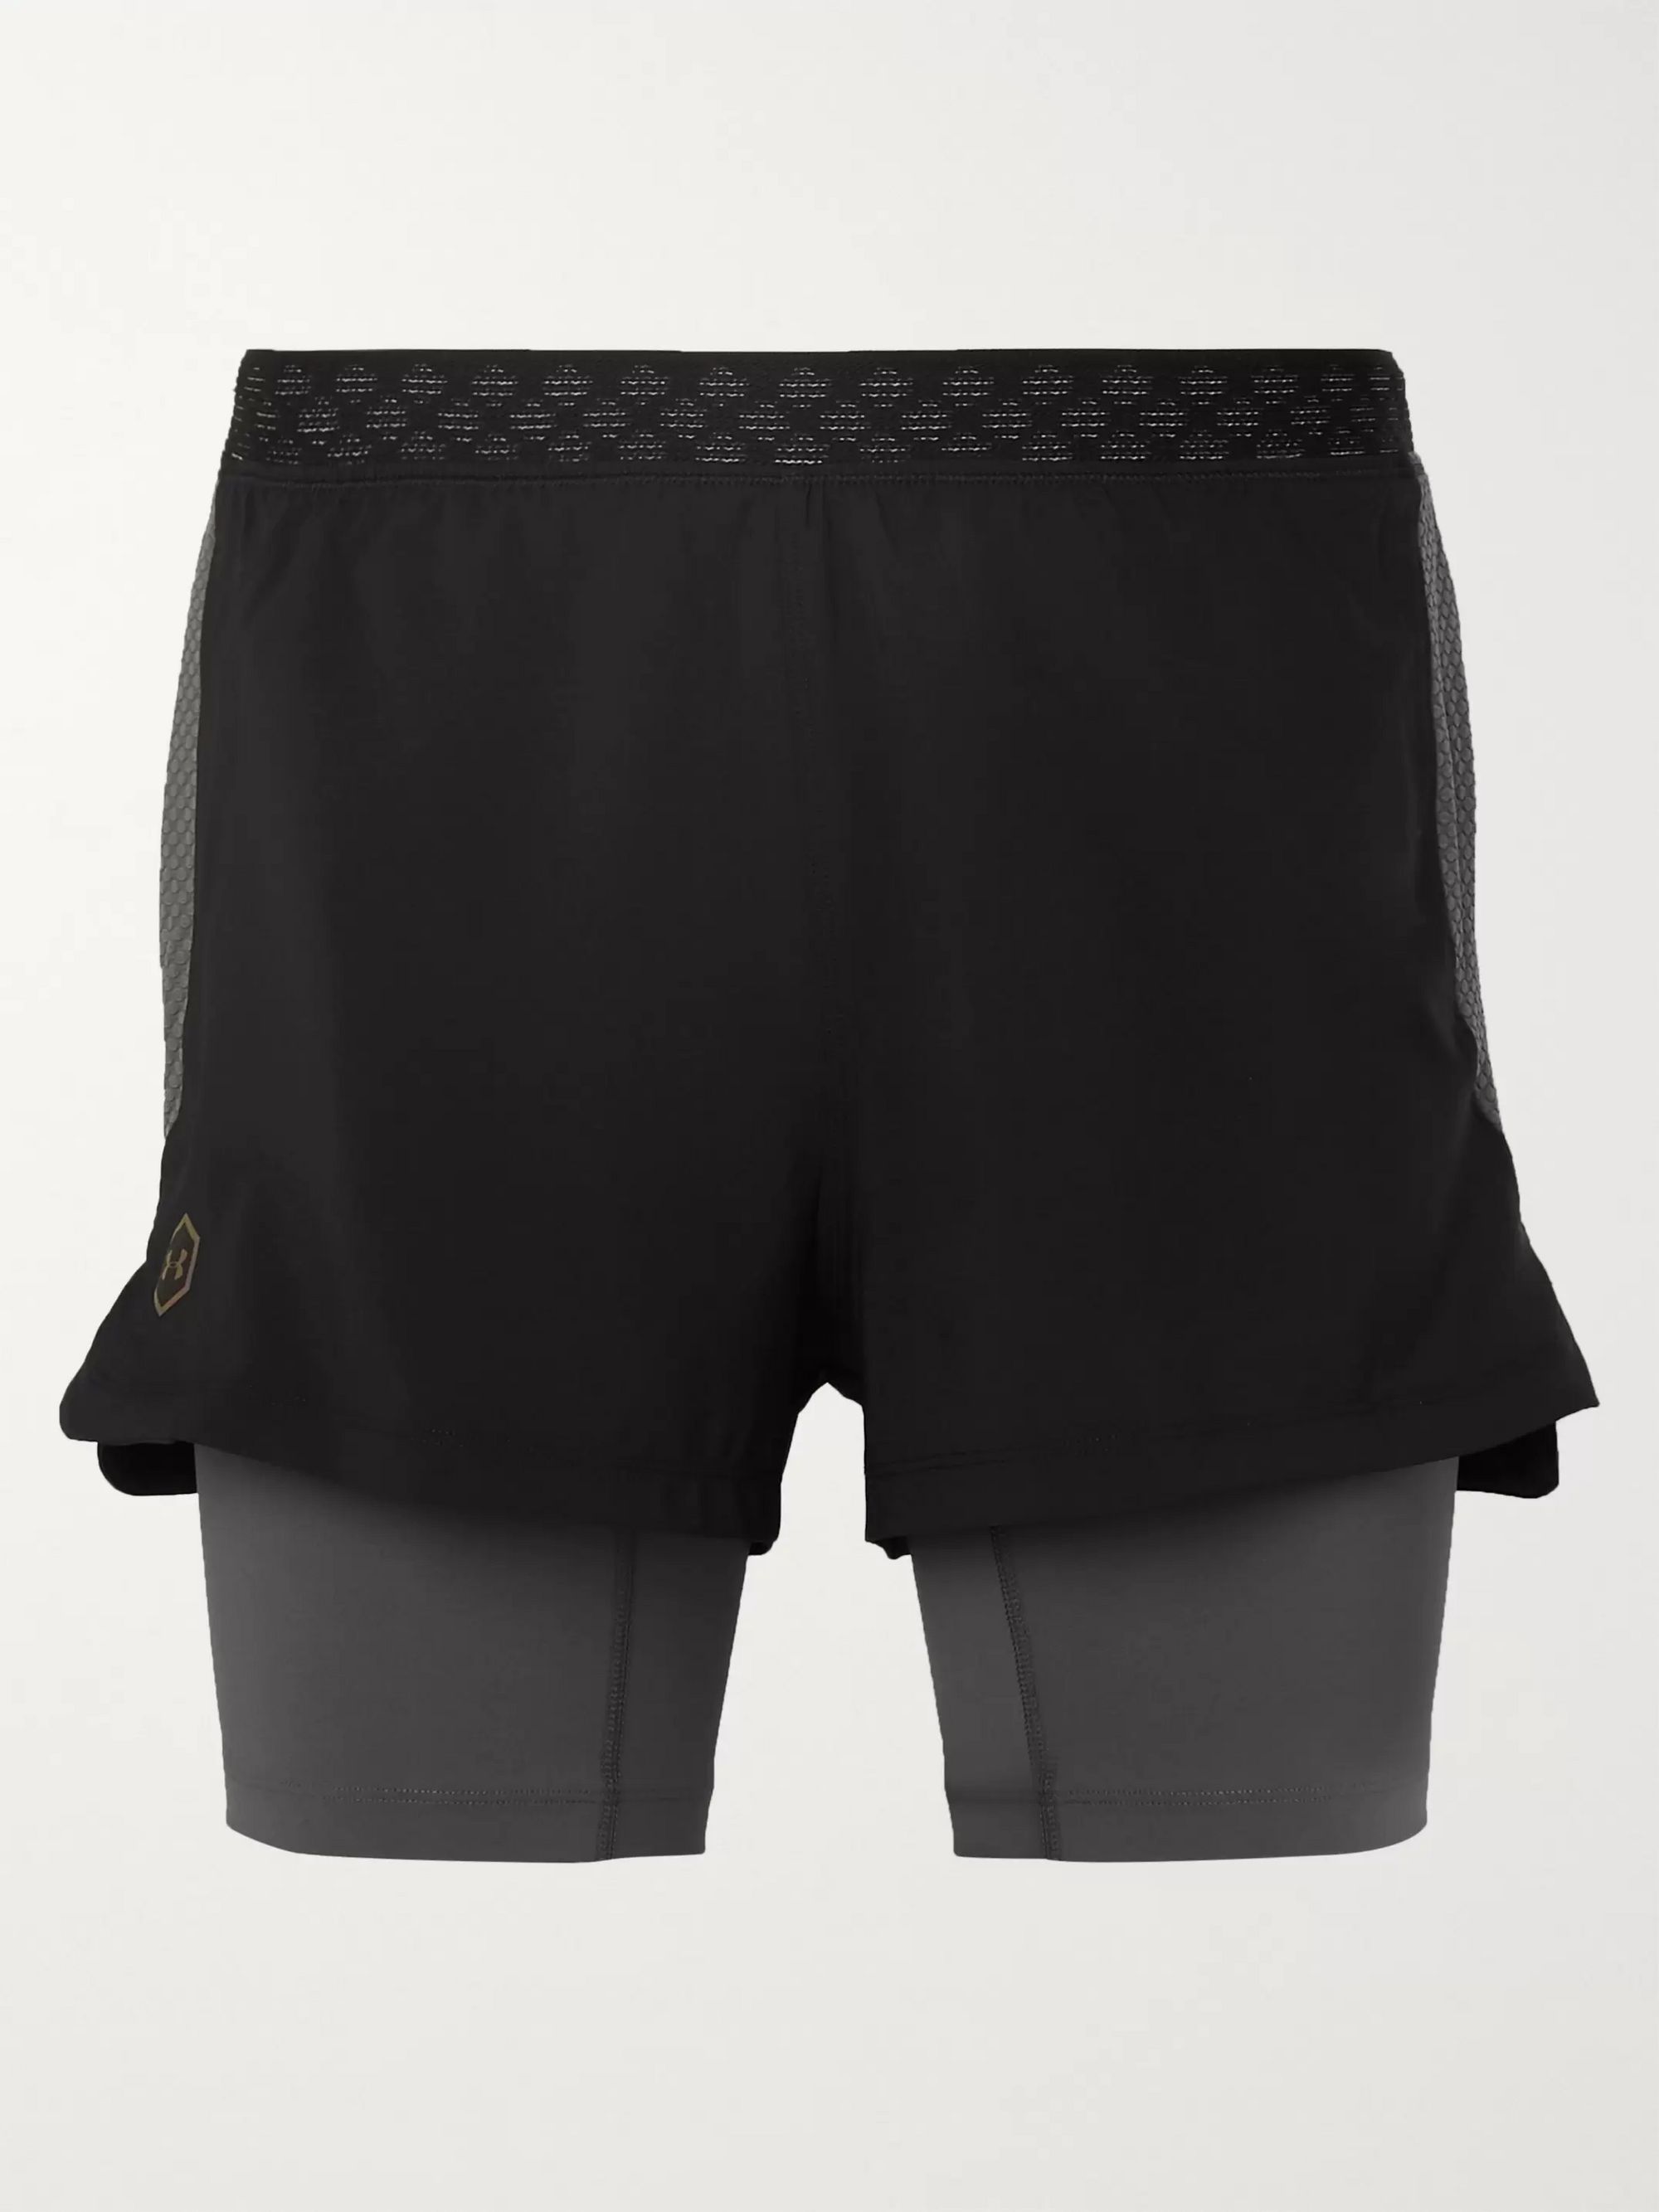 under armour stretch shorts